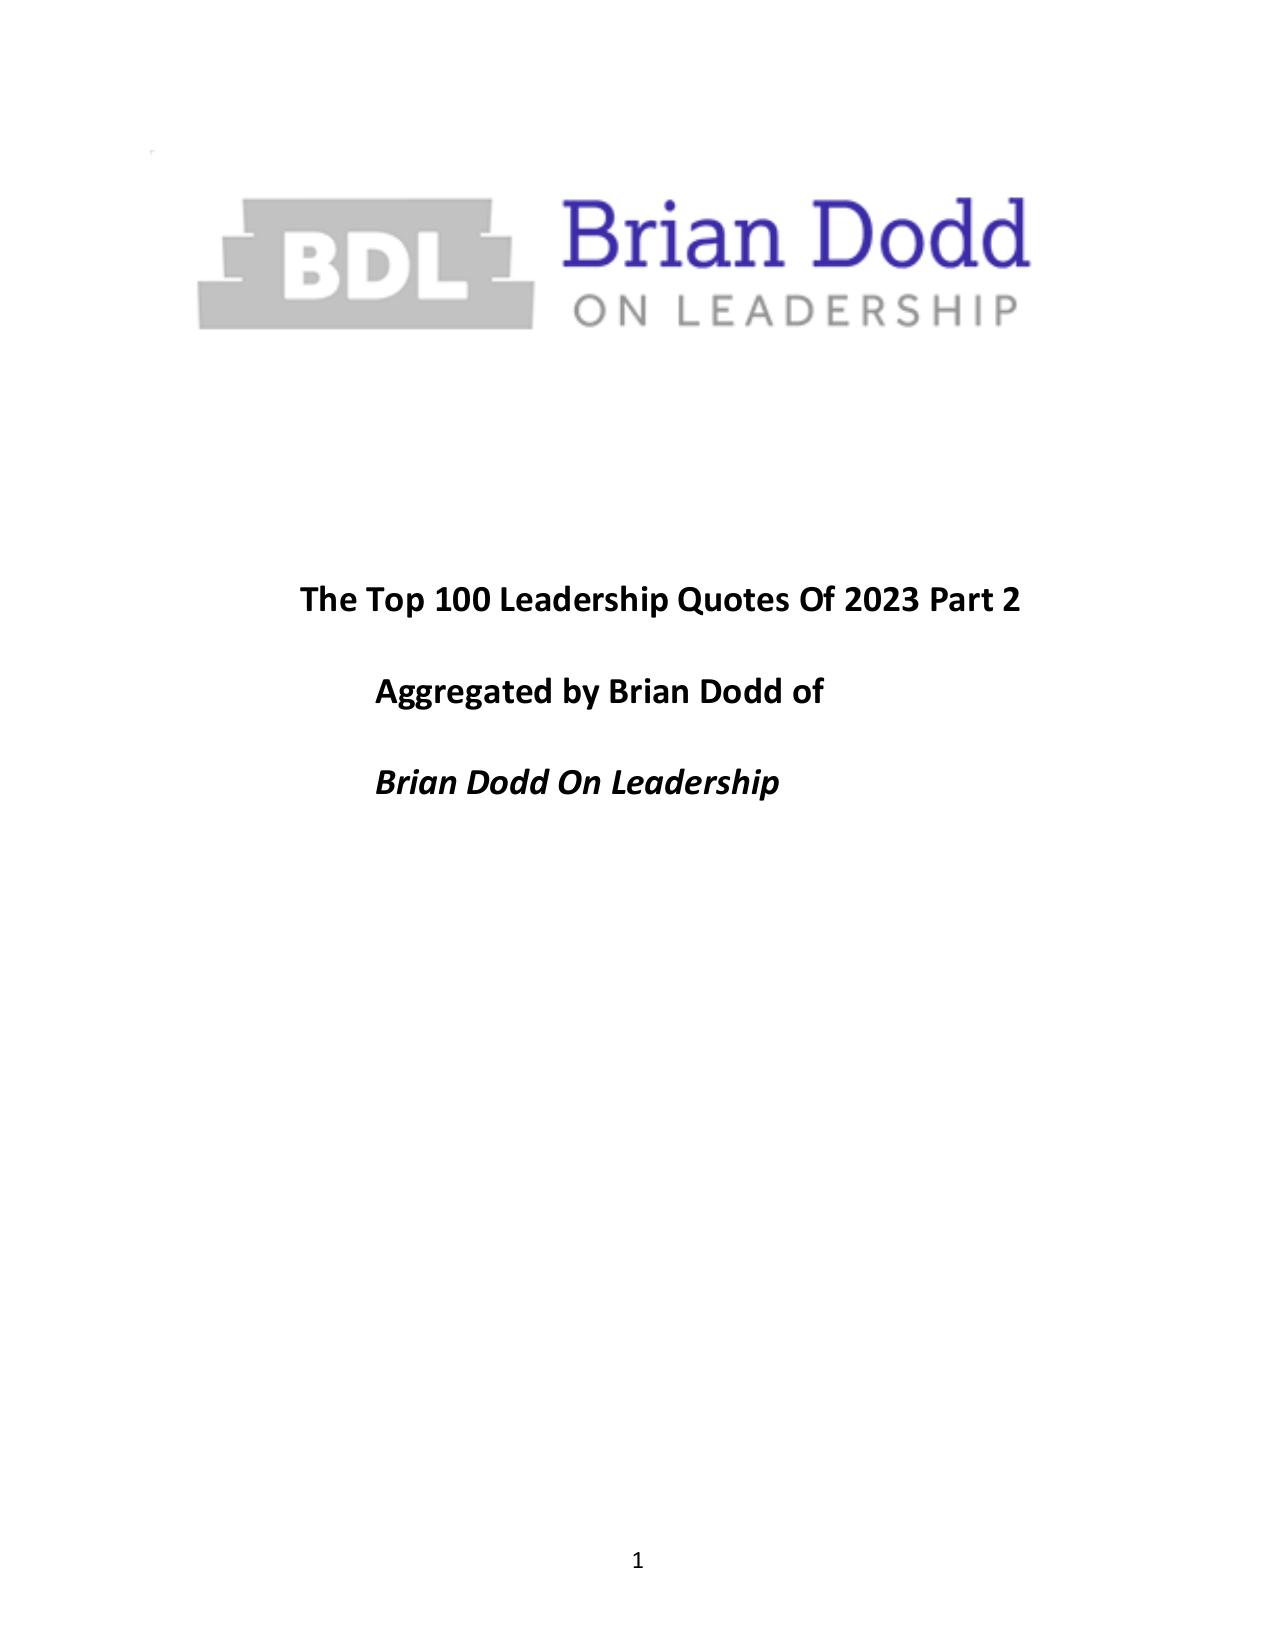 The Top 100 Leadership Quotes of 2023 Part2